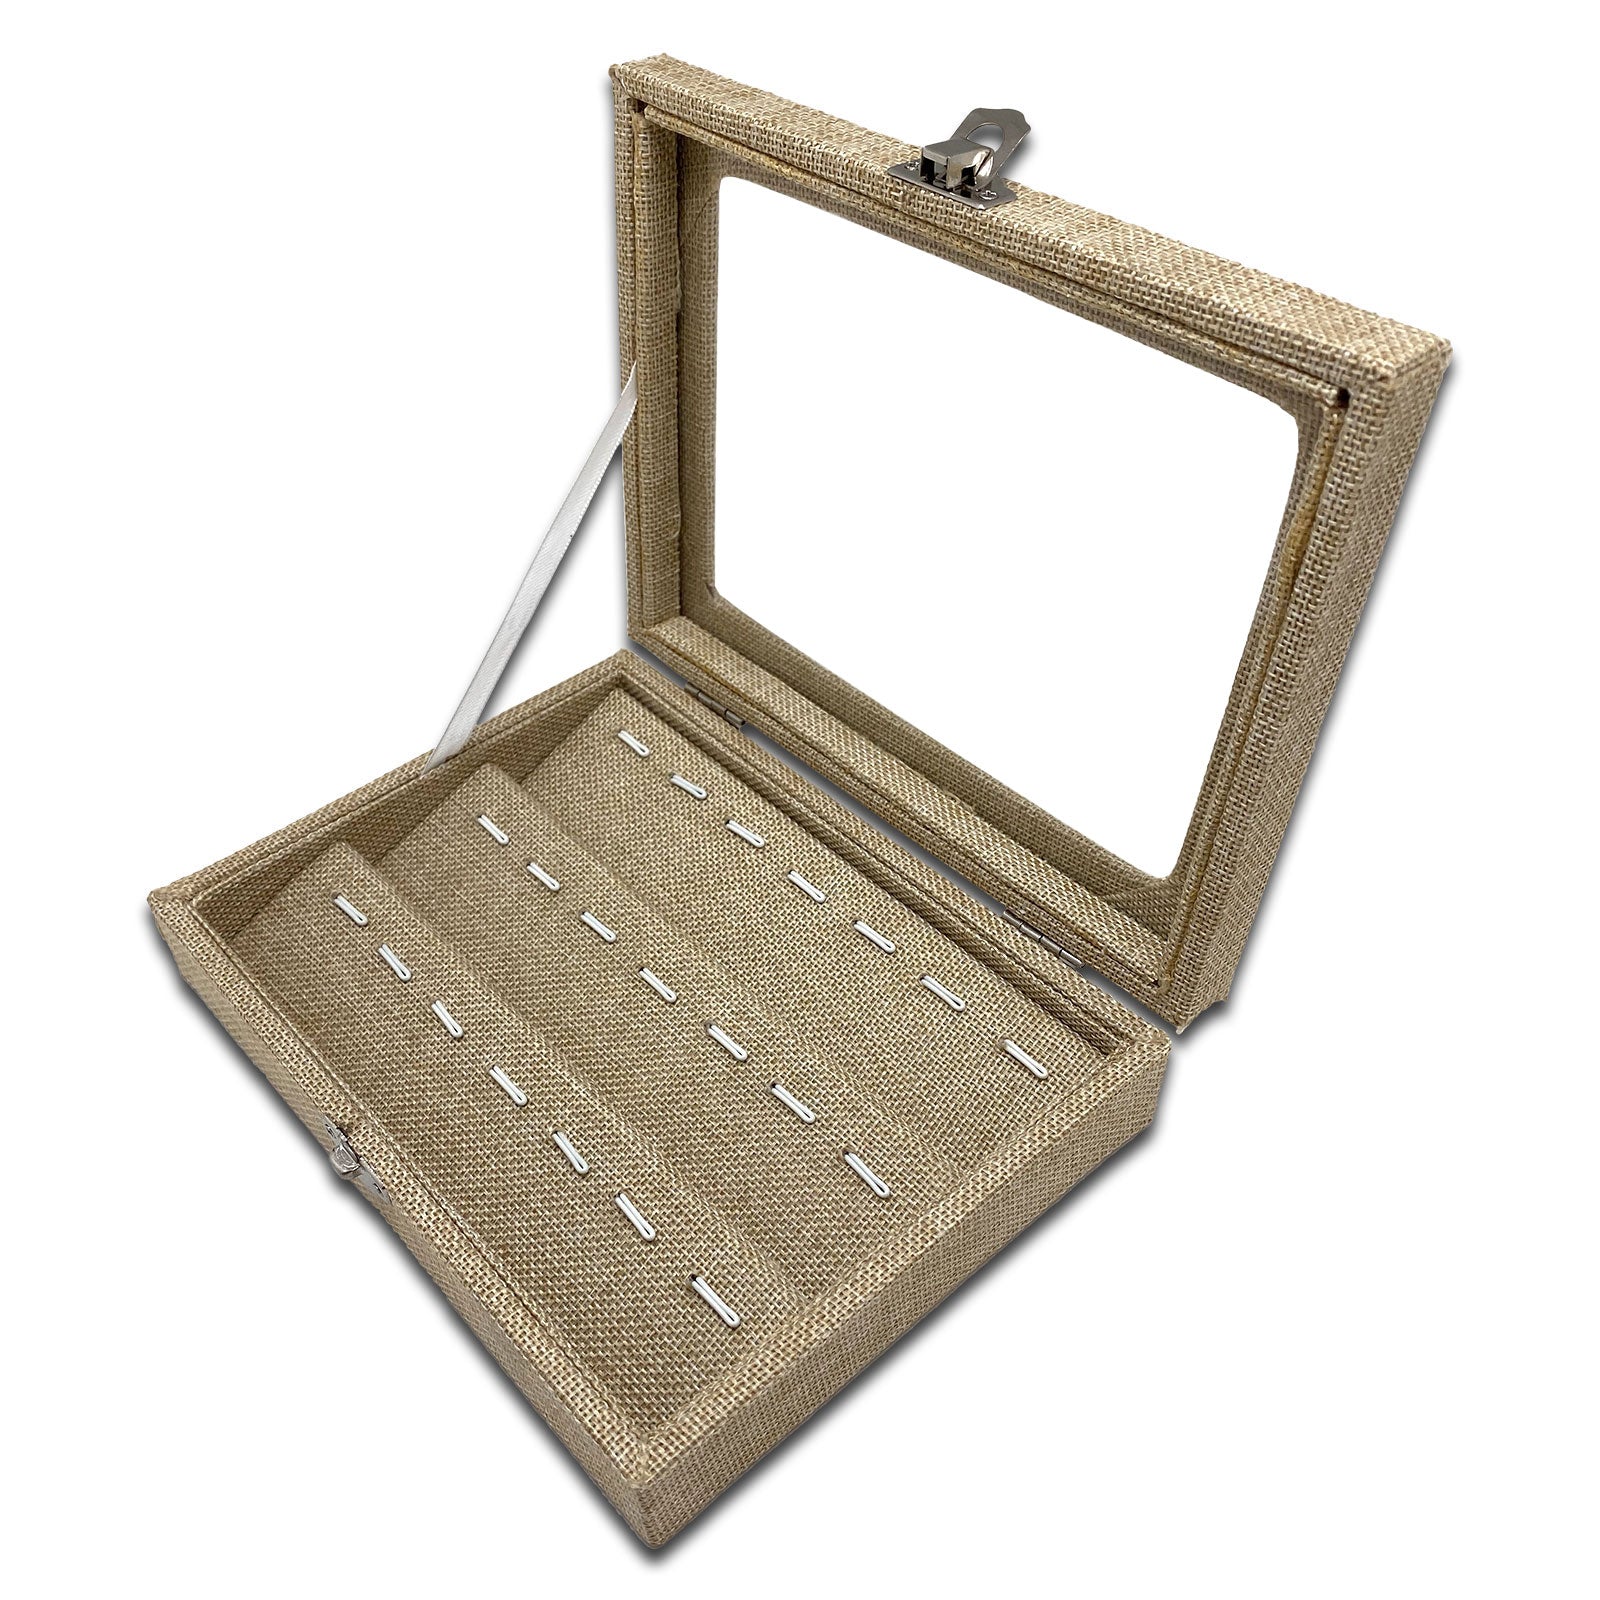 8" x 6" Beige Burlap Display Case w/ Glass Top for 21 Pendants/Charms